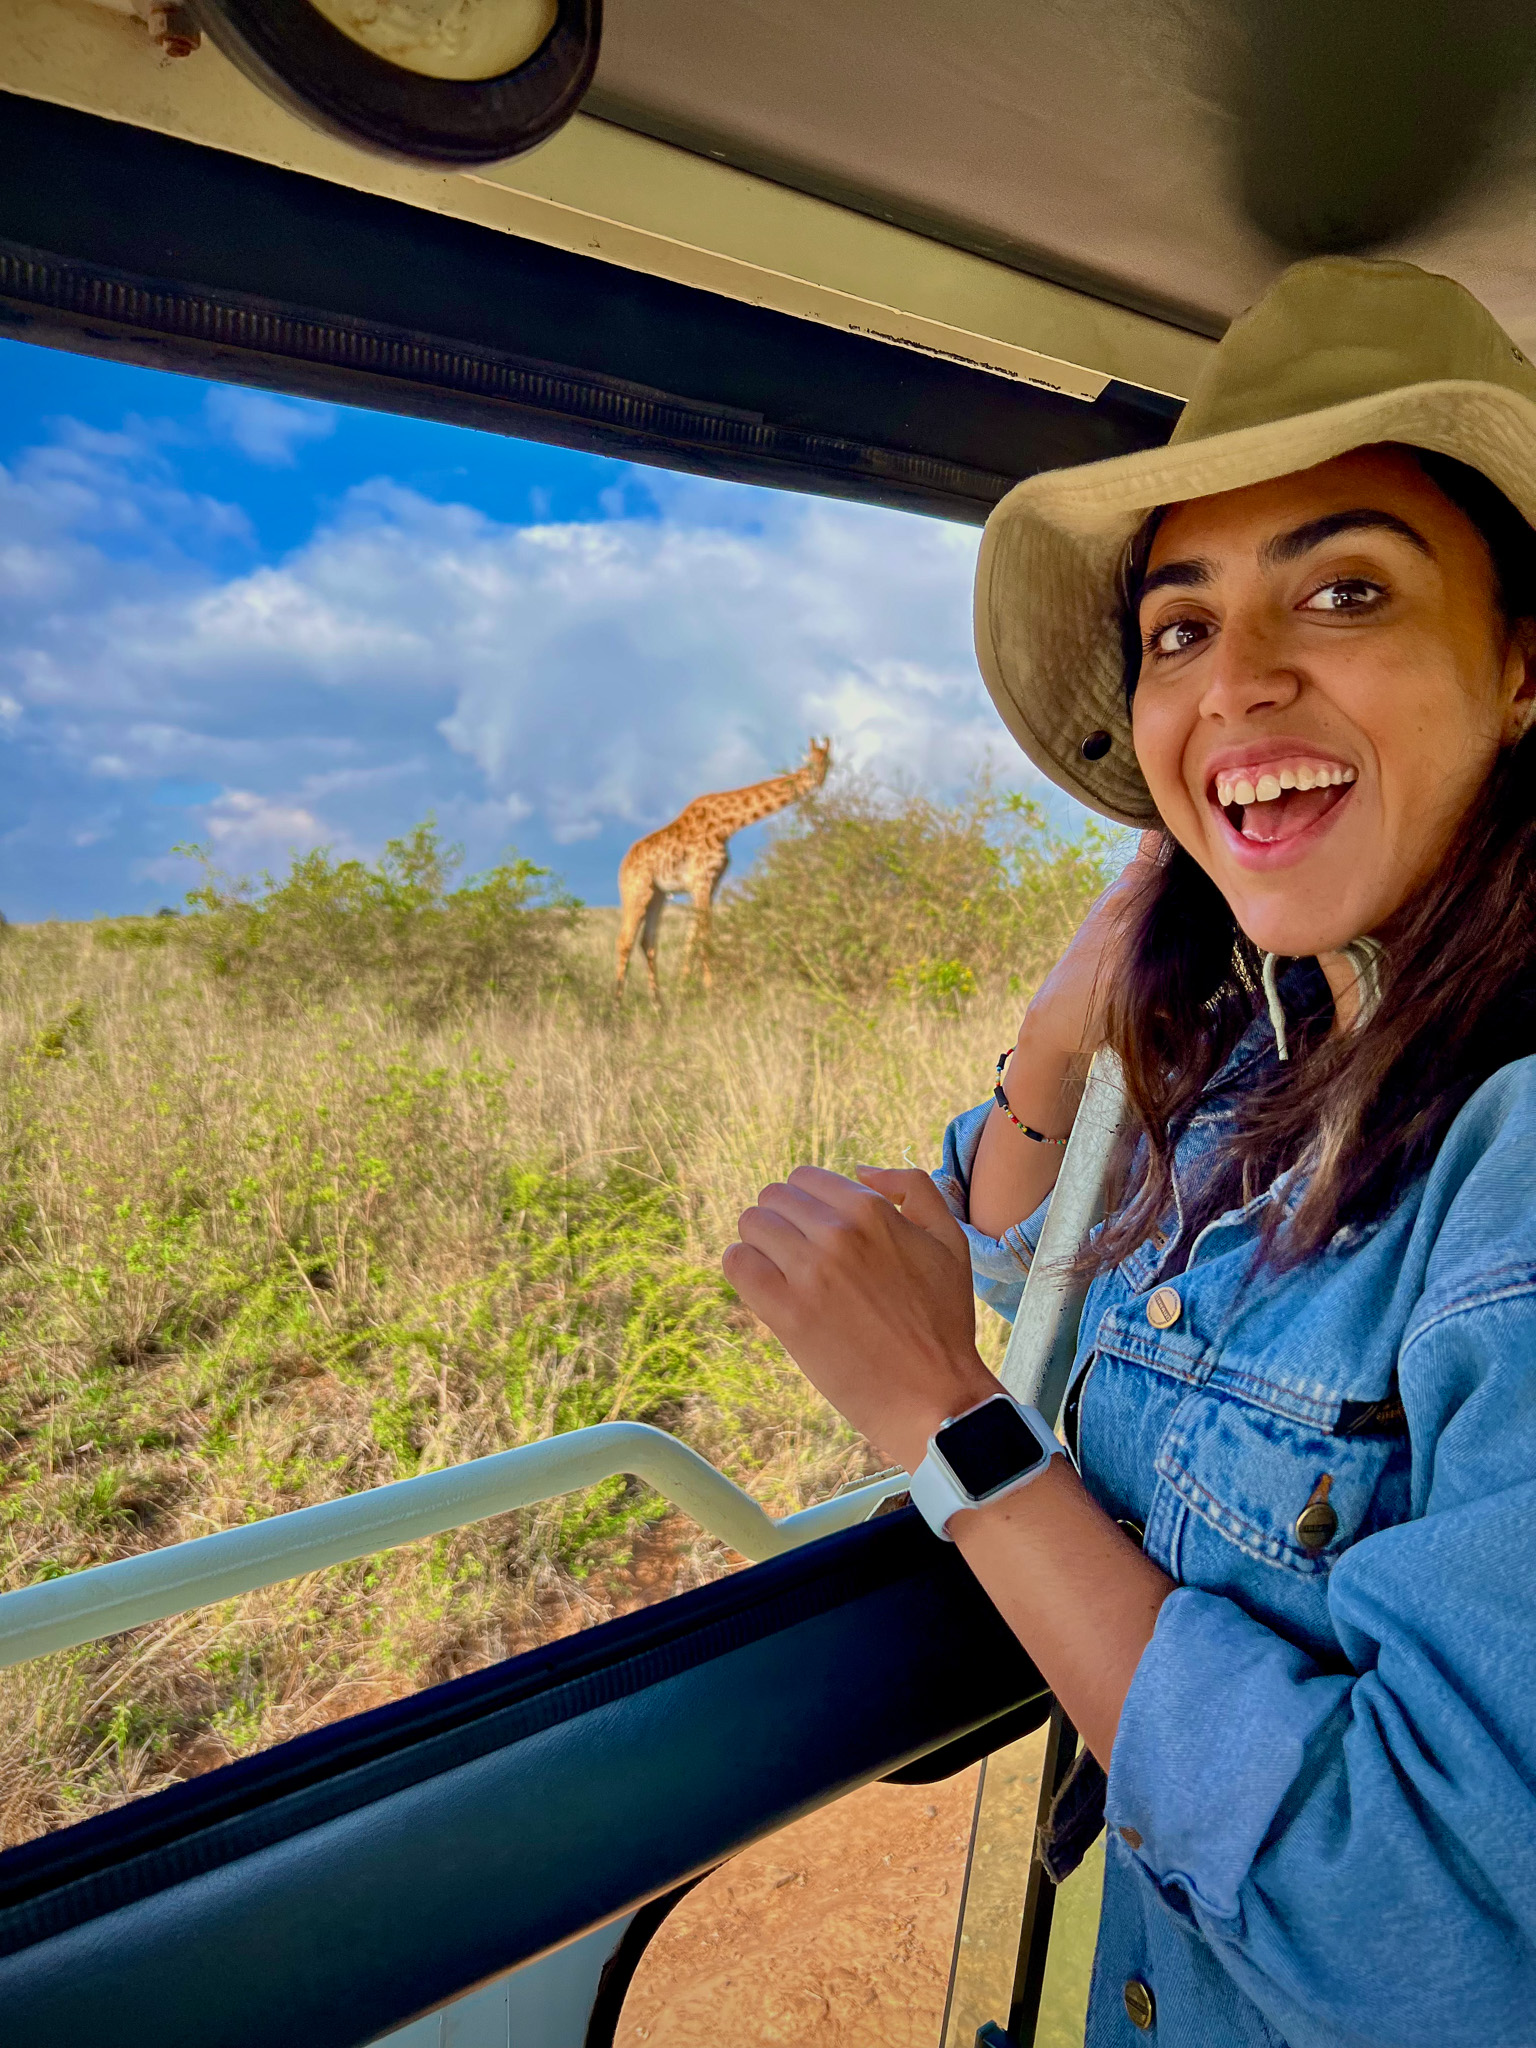 Student on a Safari in Kenya. She is smiling into the camera. A giraffe is off in the distance.